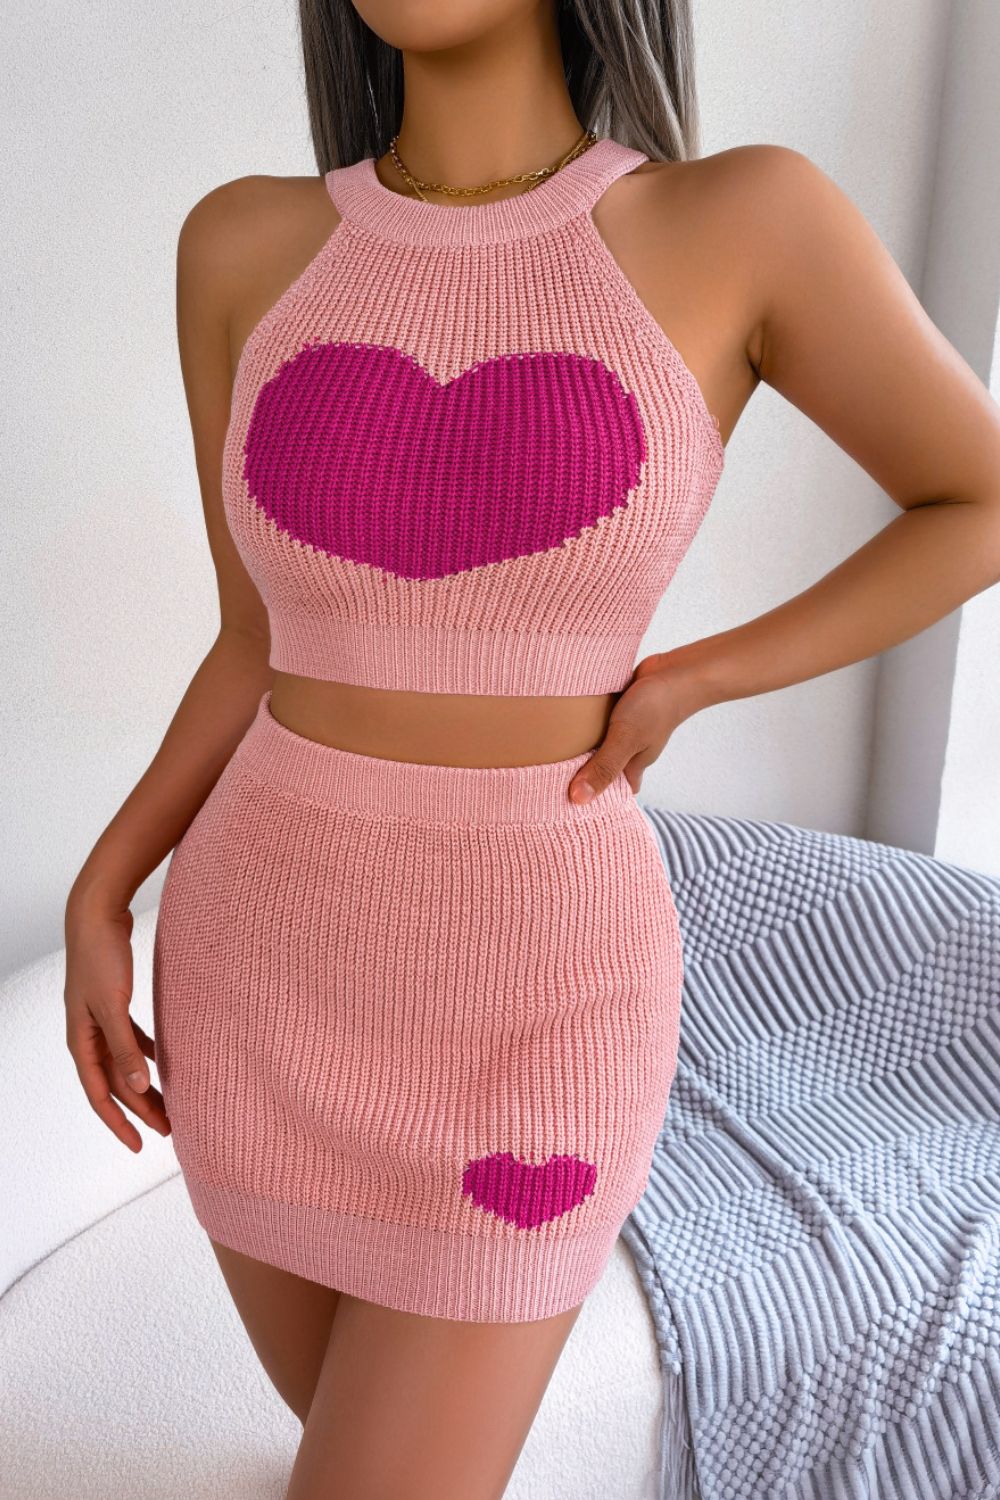 Heart Contrast Ribbed Sleeveless Knit Top and Skirt Set - Girl Code